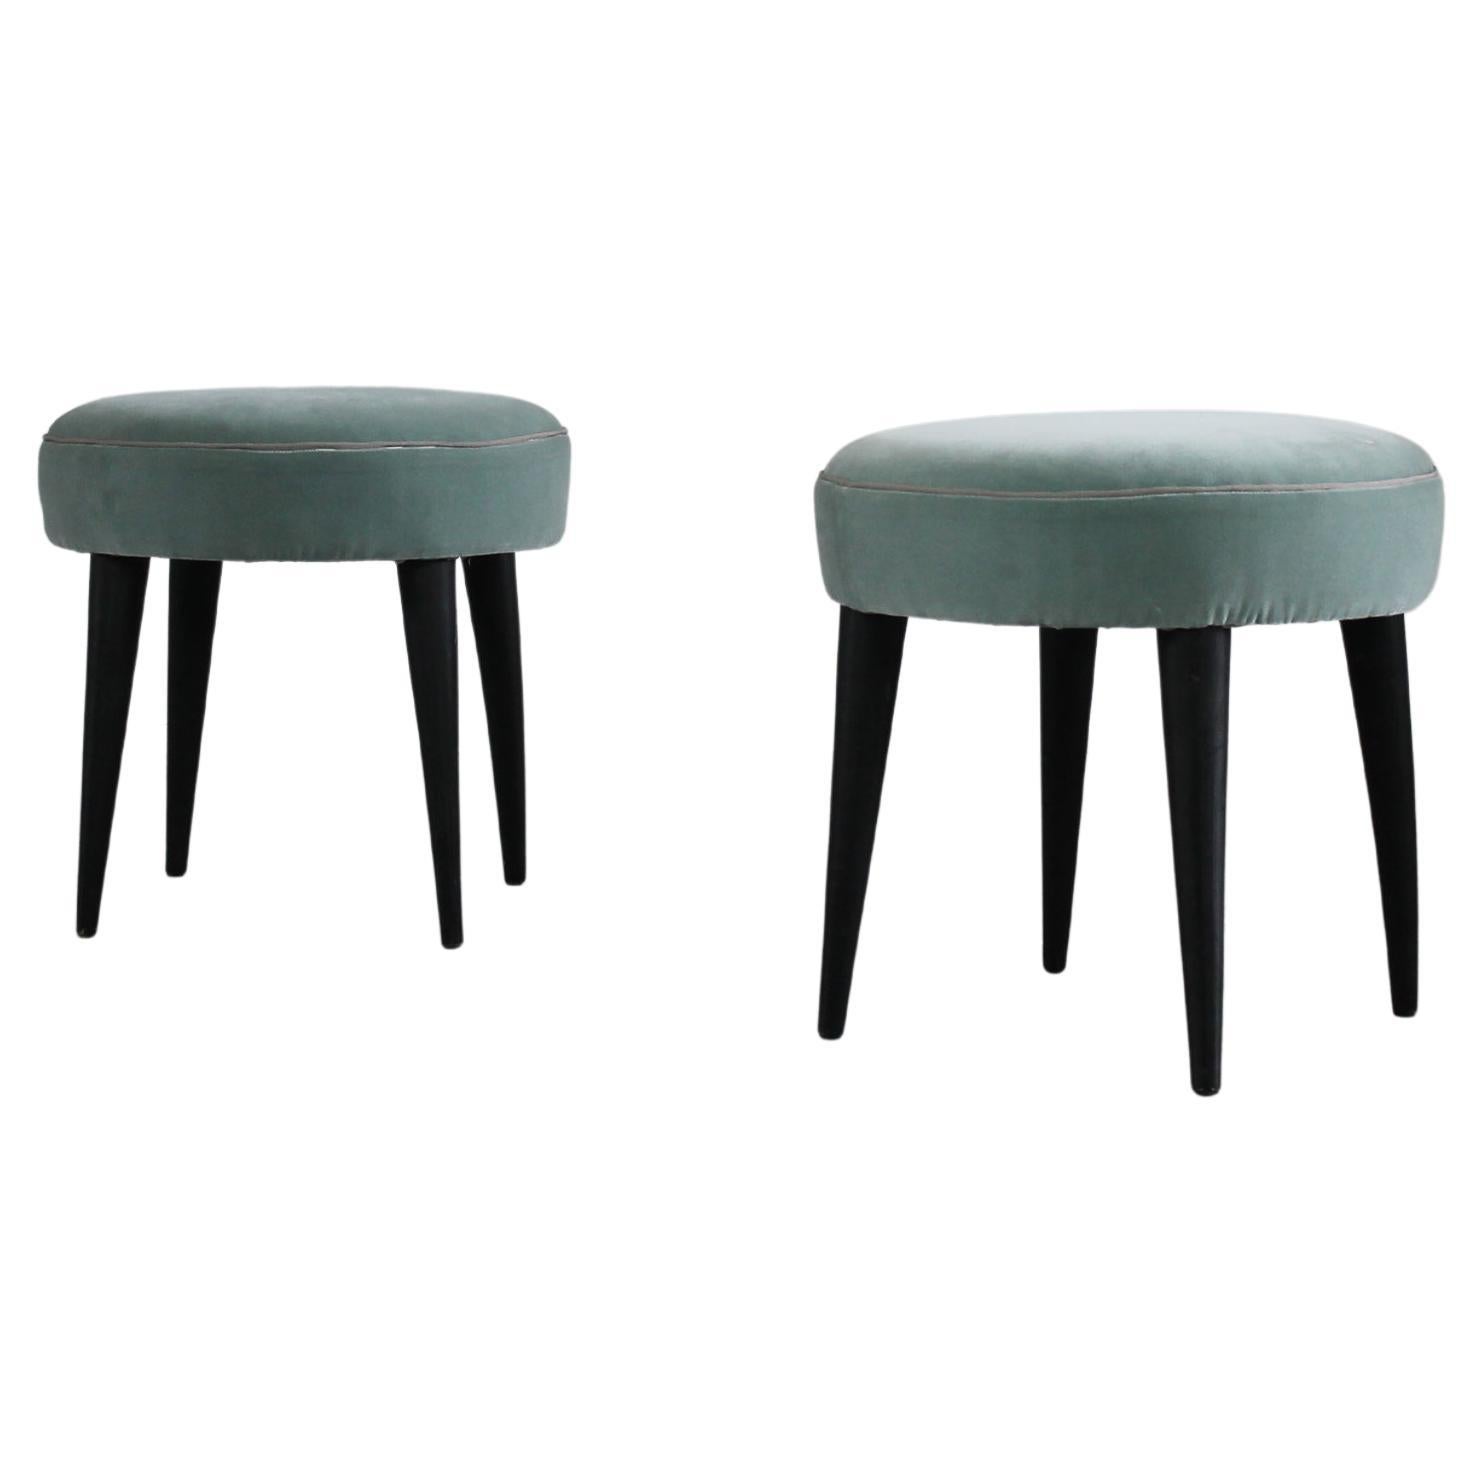 Gio Ponti Set of Two Stools in Black Lacquered Wood and Fabric 1950s Italy For Sale